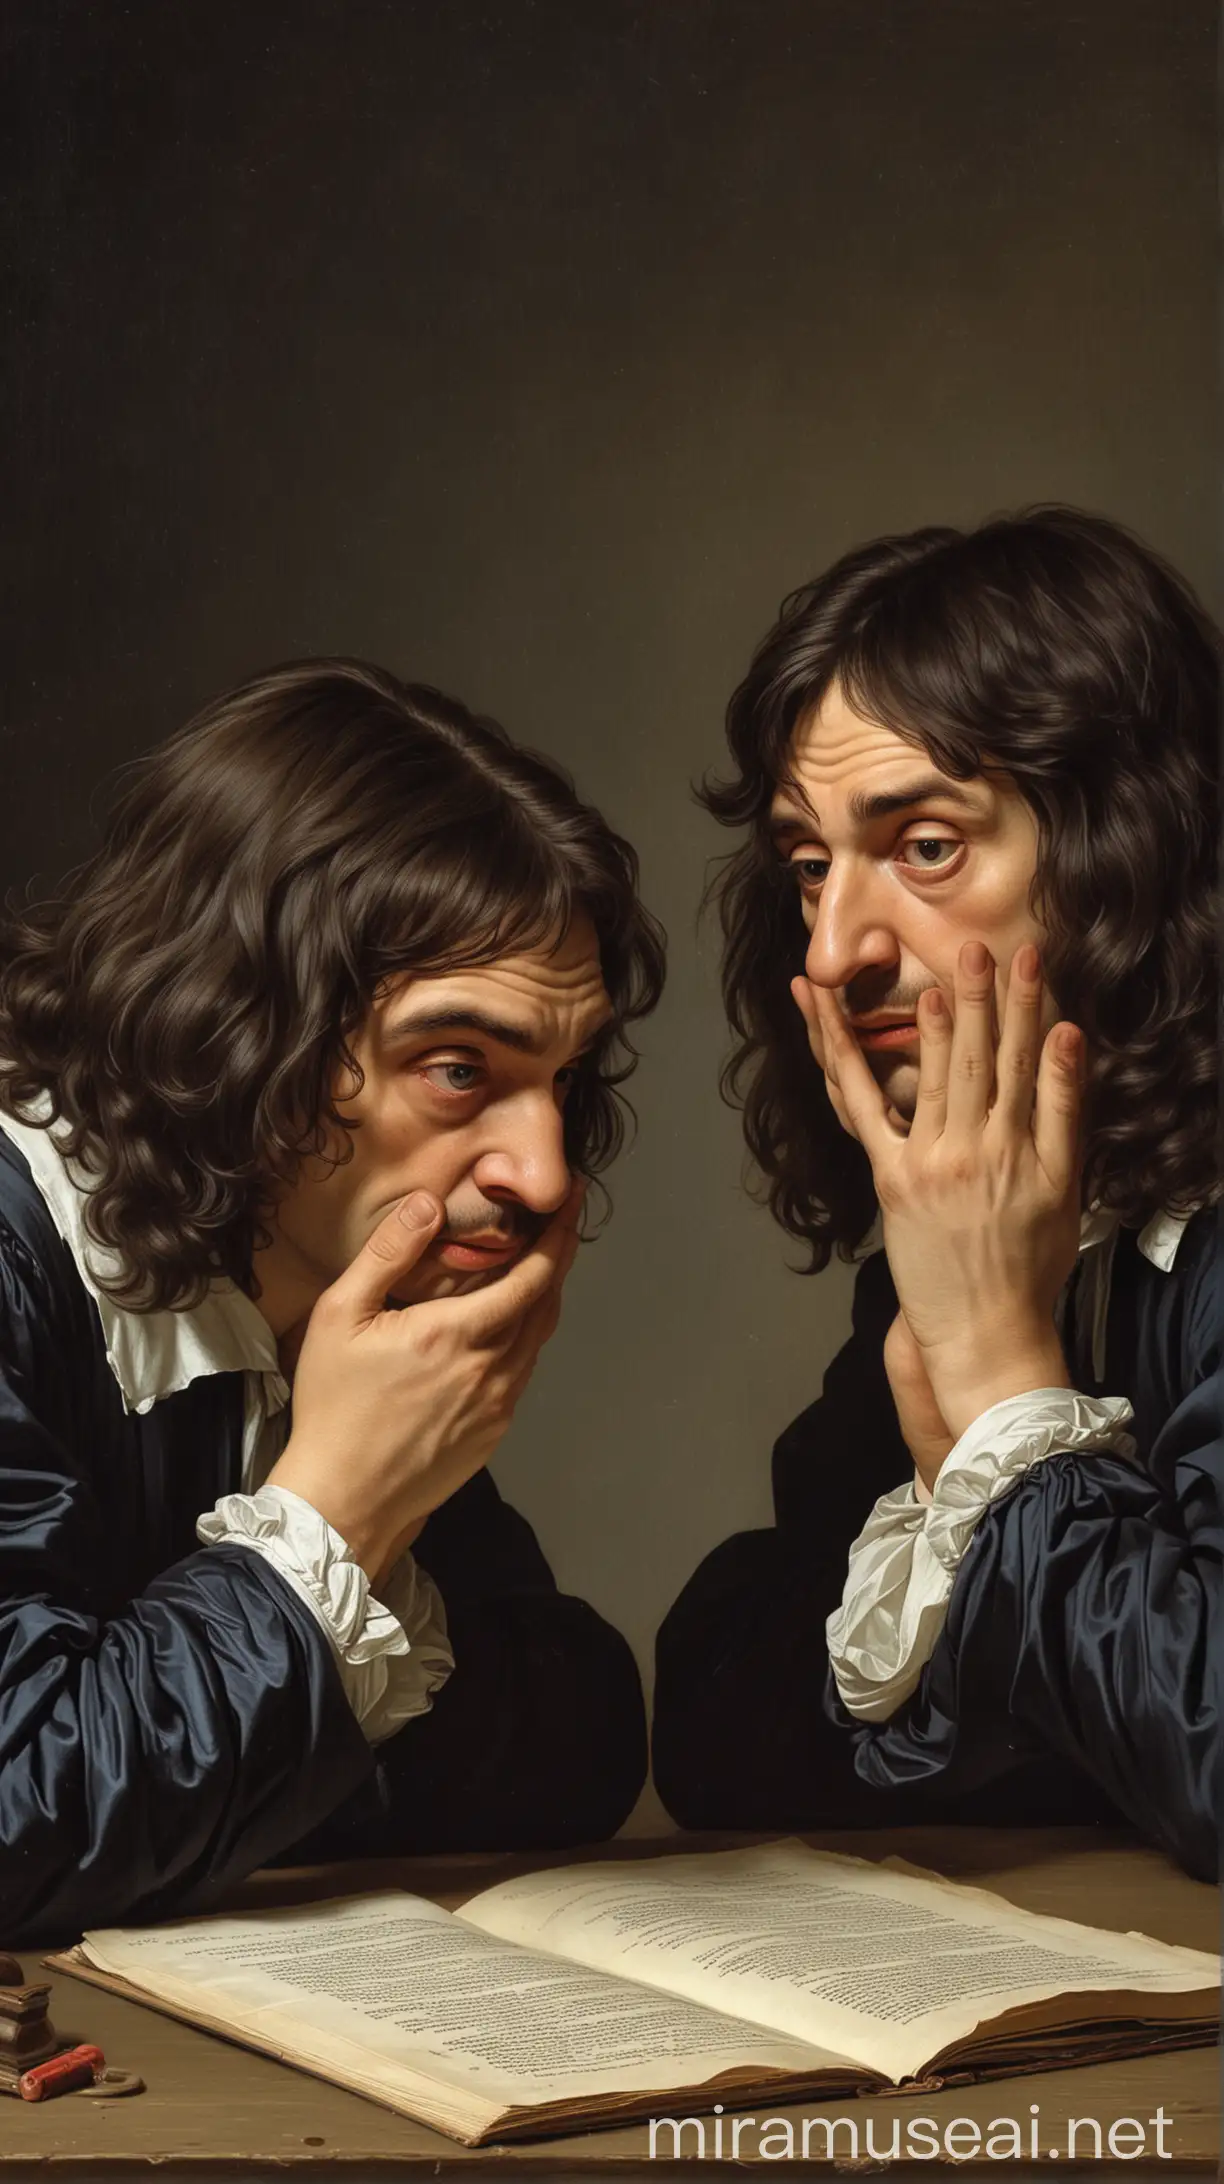 Two Descartes Men Doubting Each Others Existence